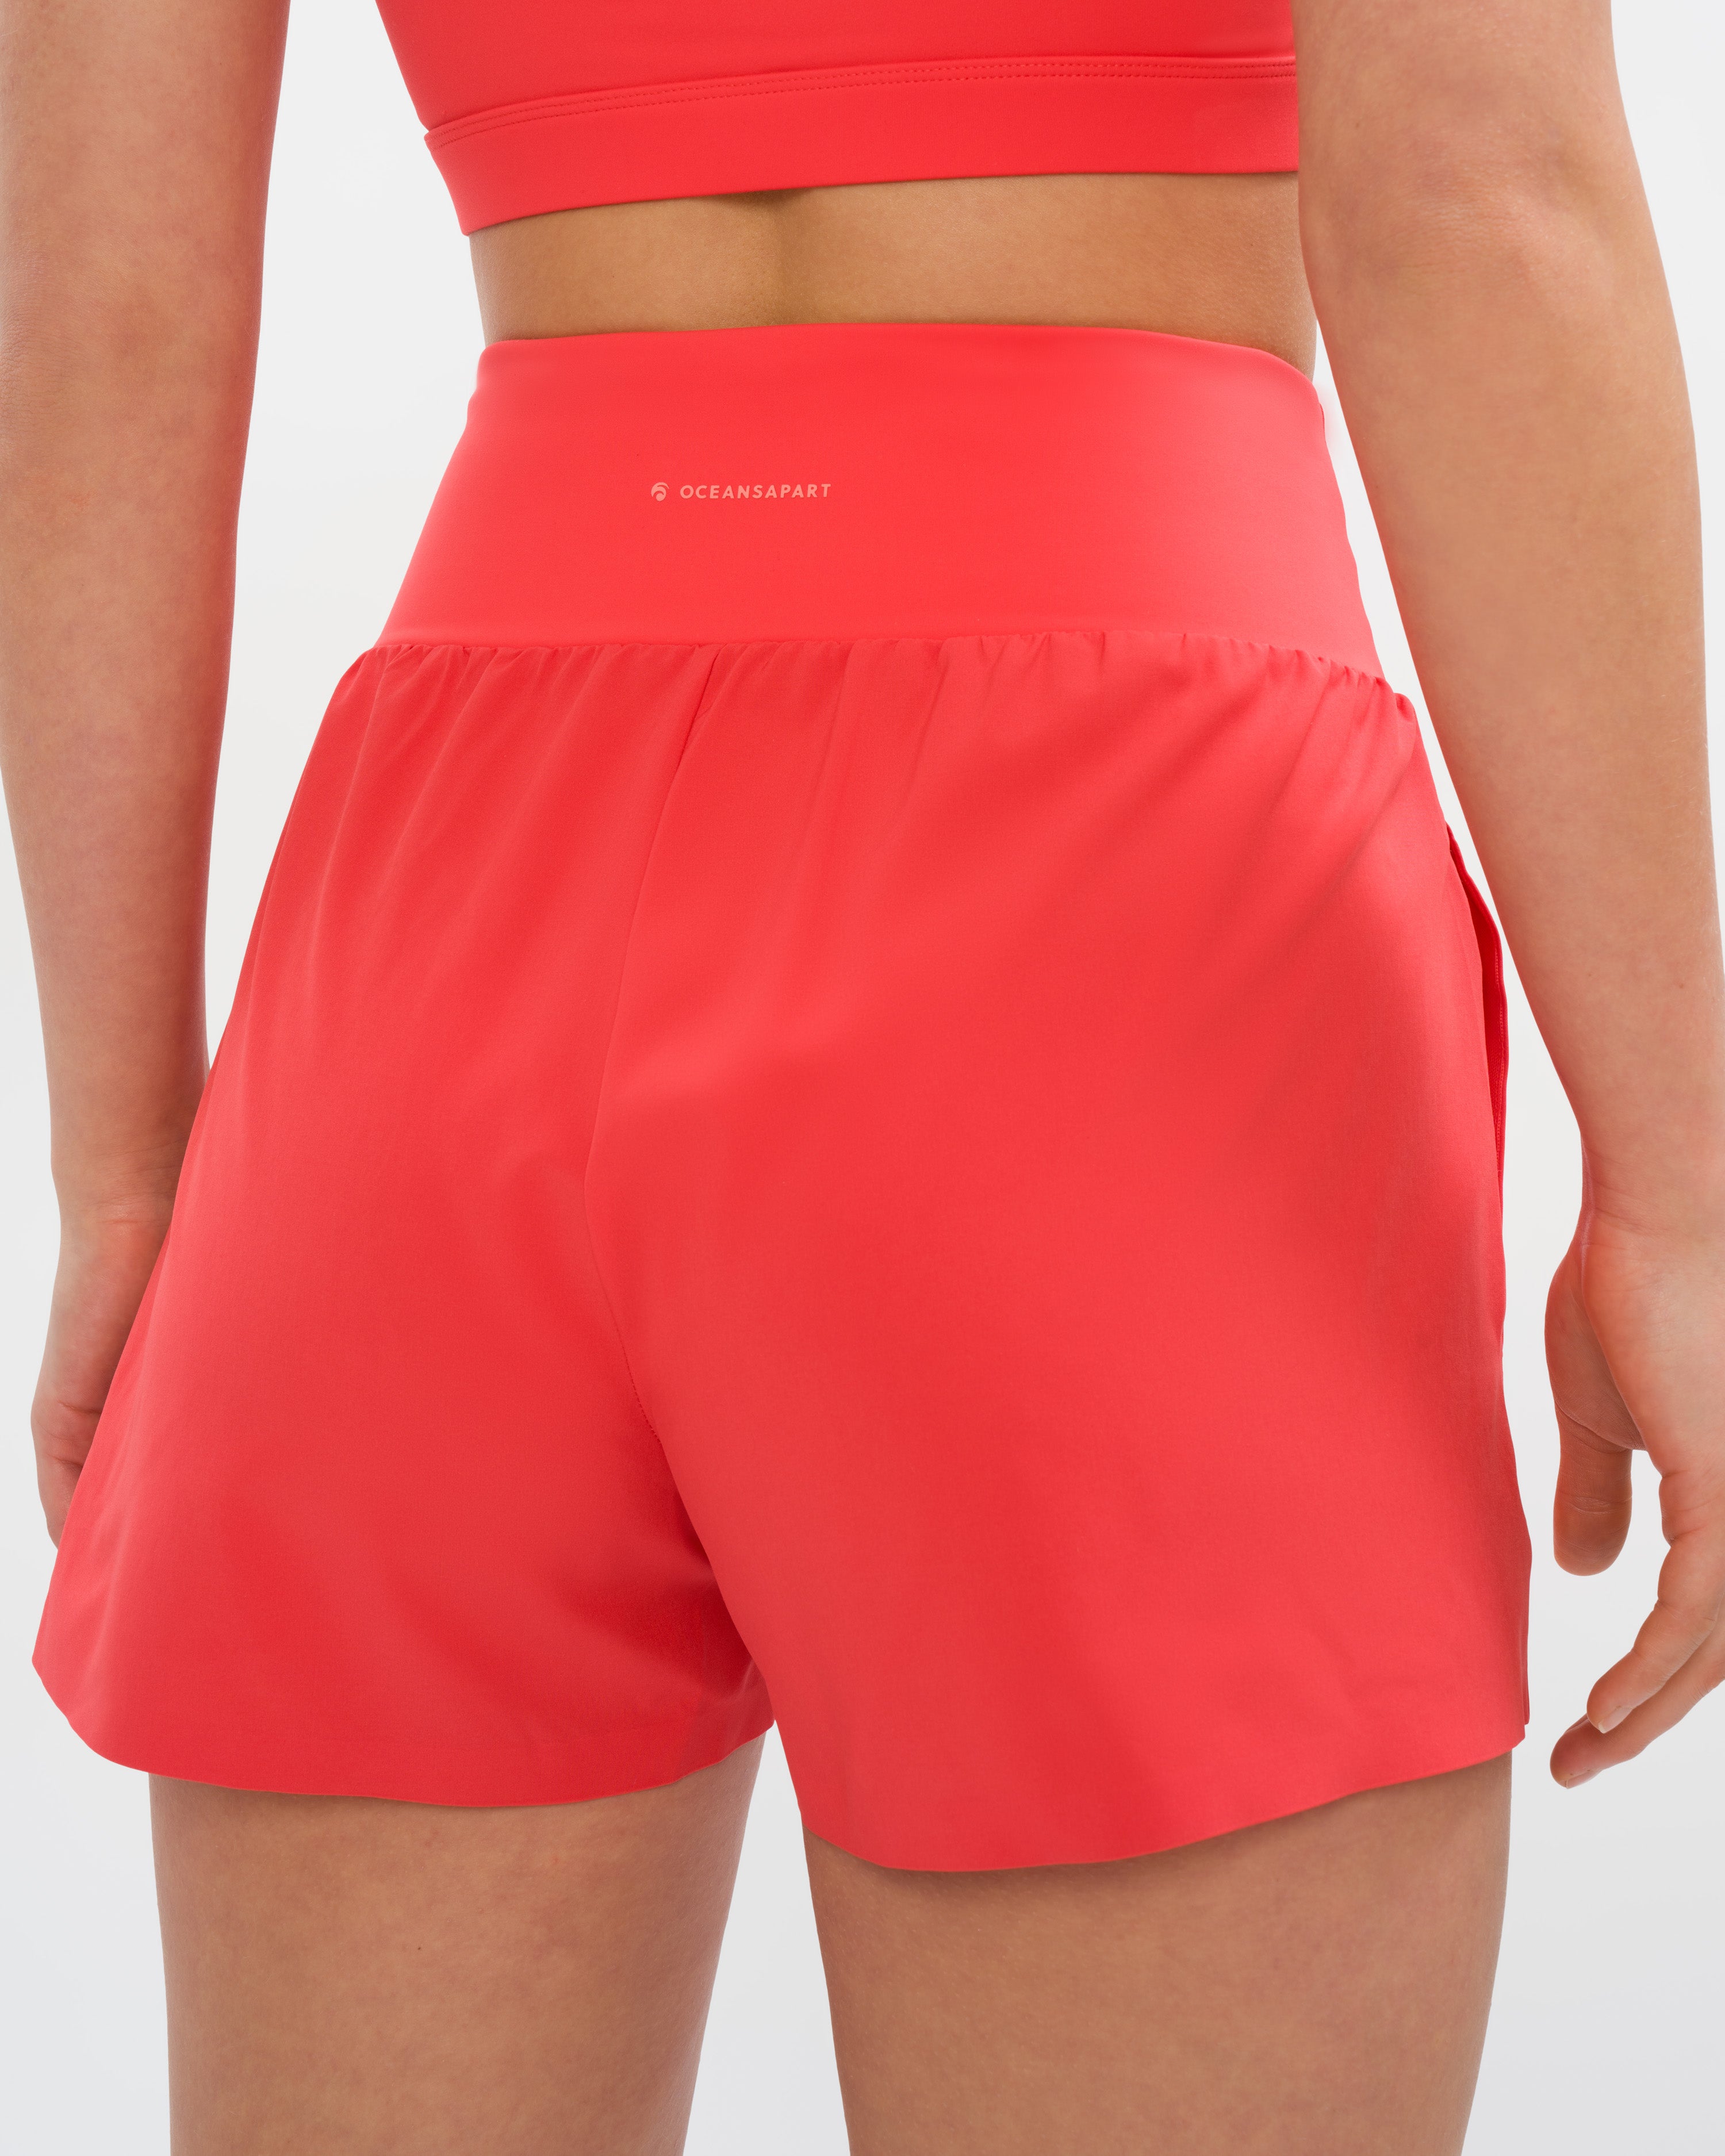 Marina Short Cropped Set Deluxe - Lillet Red & Light Lillet Red